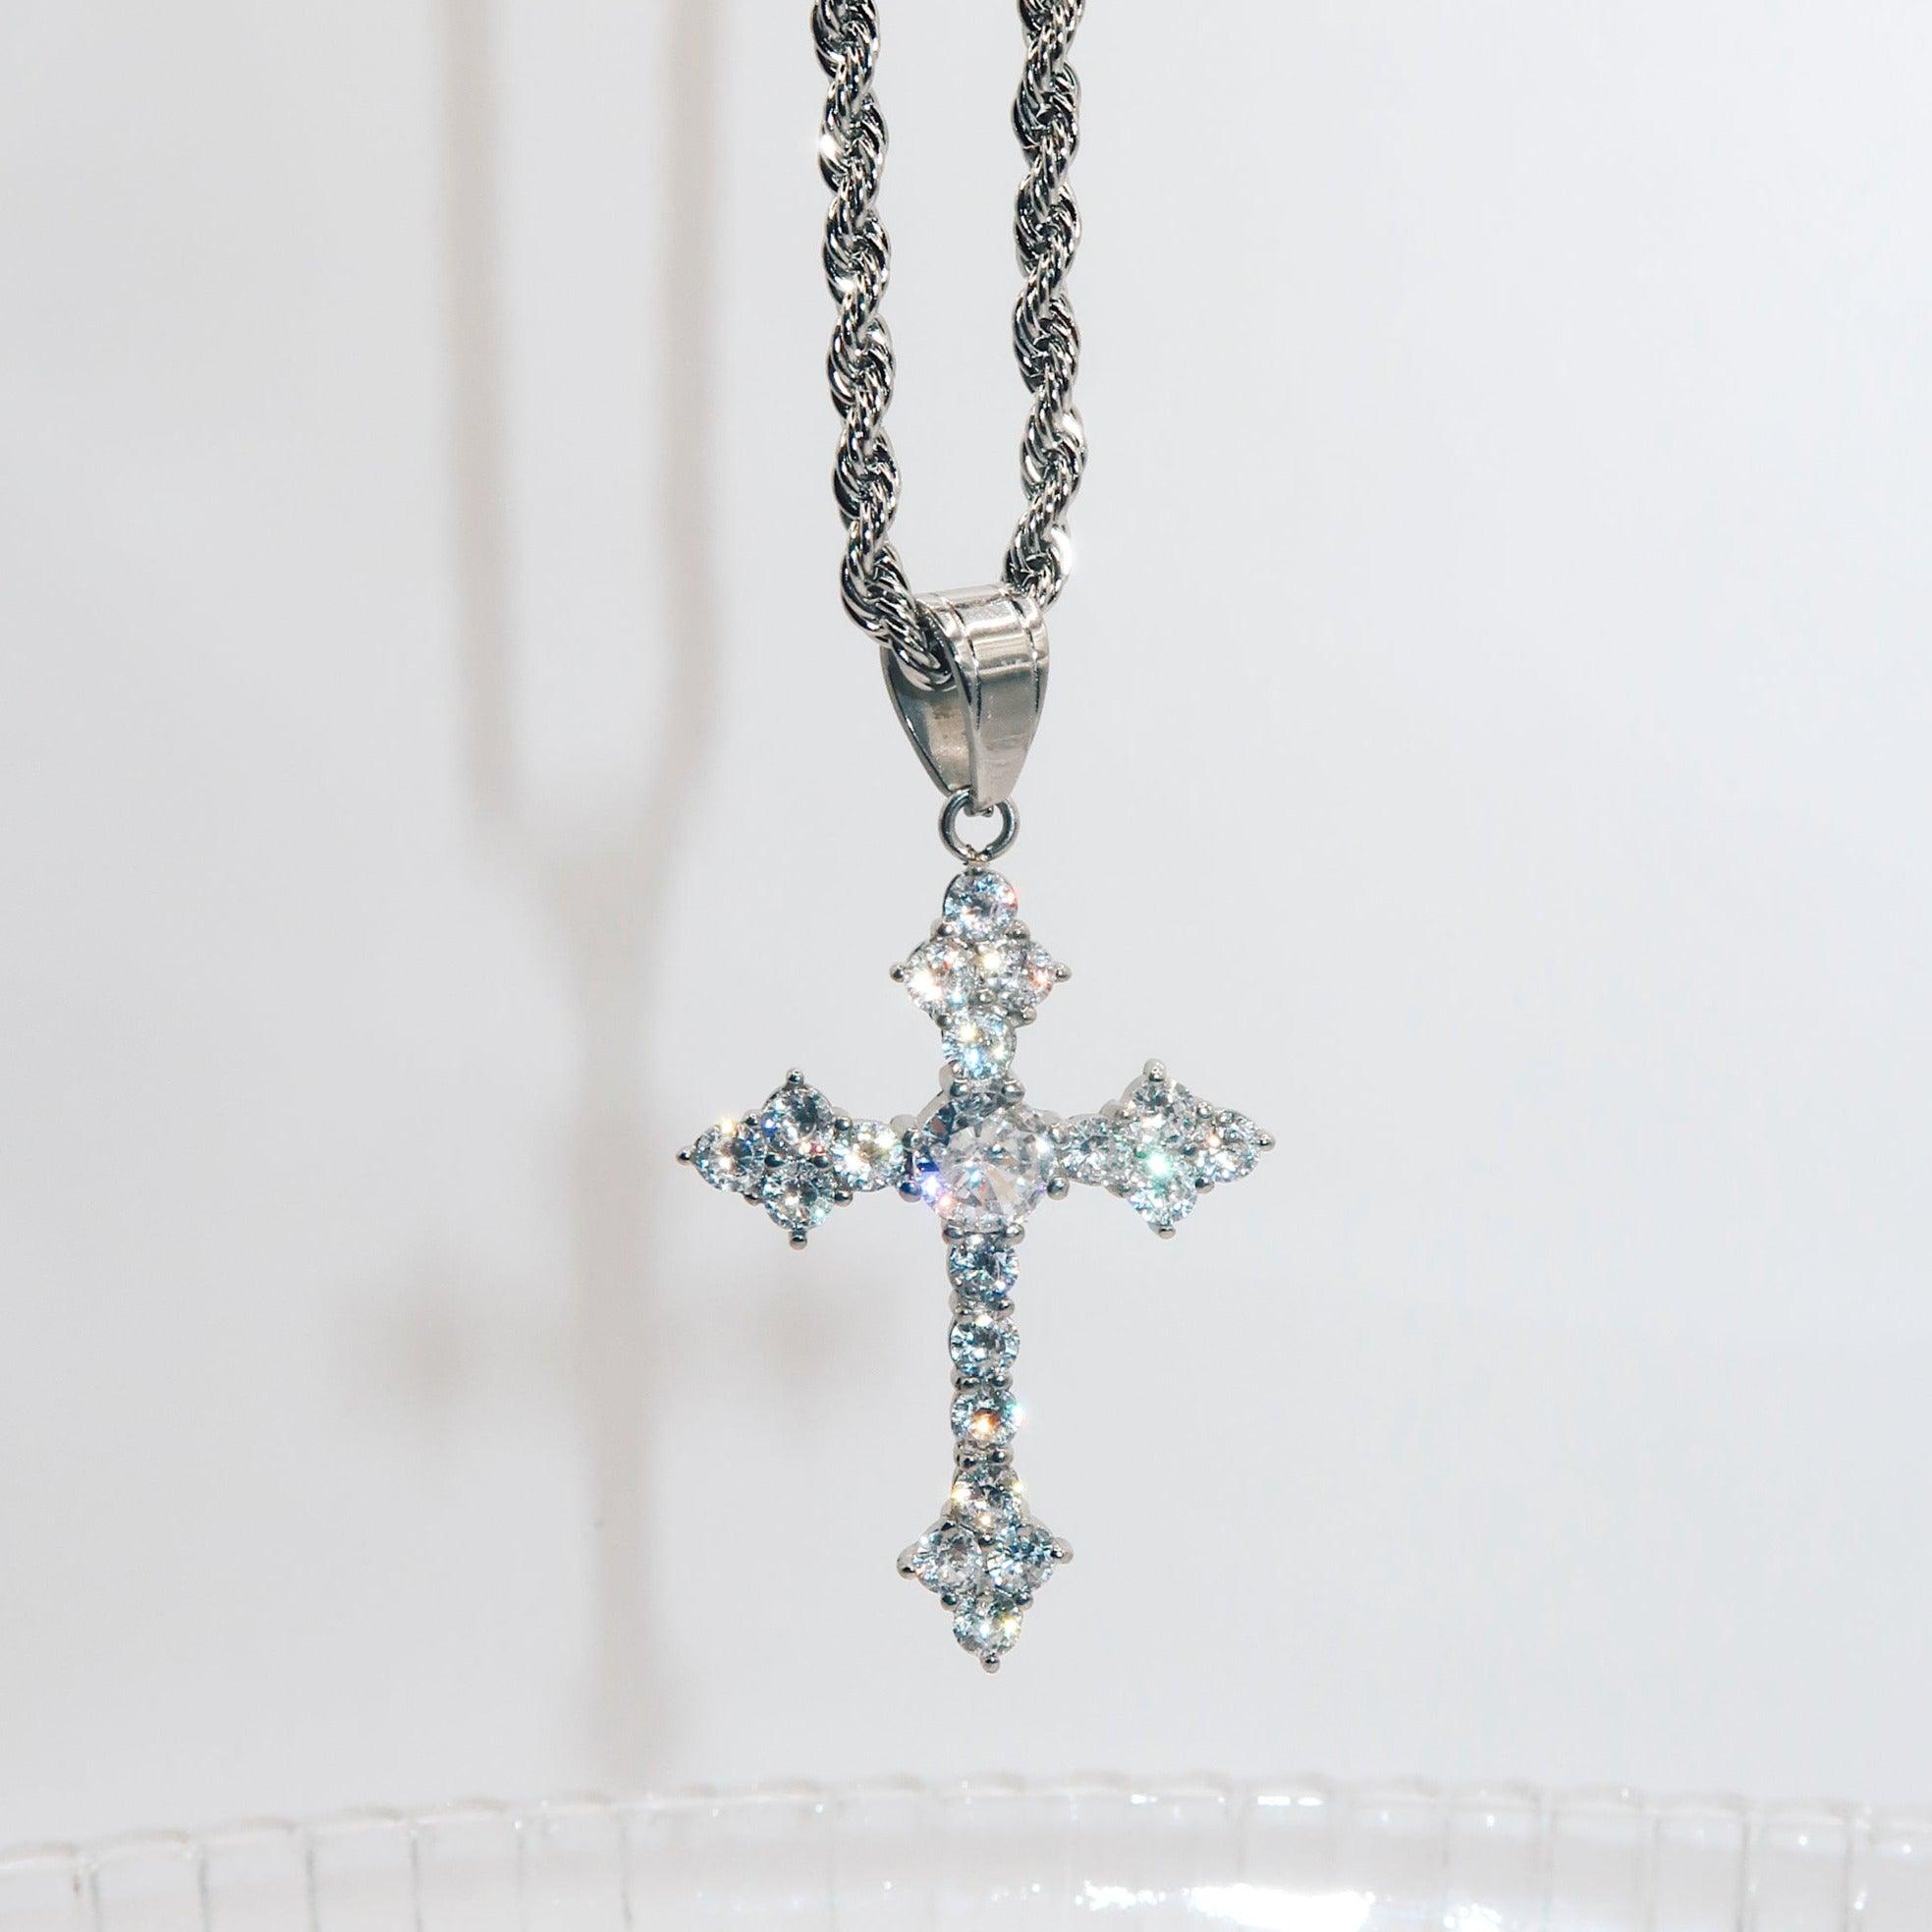 CANDACE - 18K PVD Gold Plated Cross Necklace with Round Brilliant Cut CZ Stones - Mixed Metals